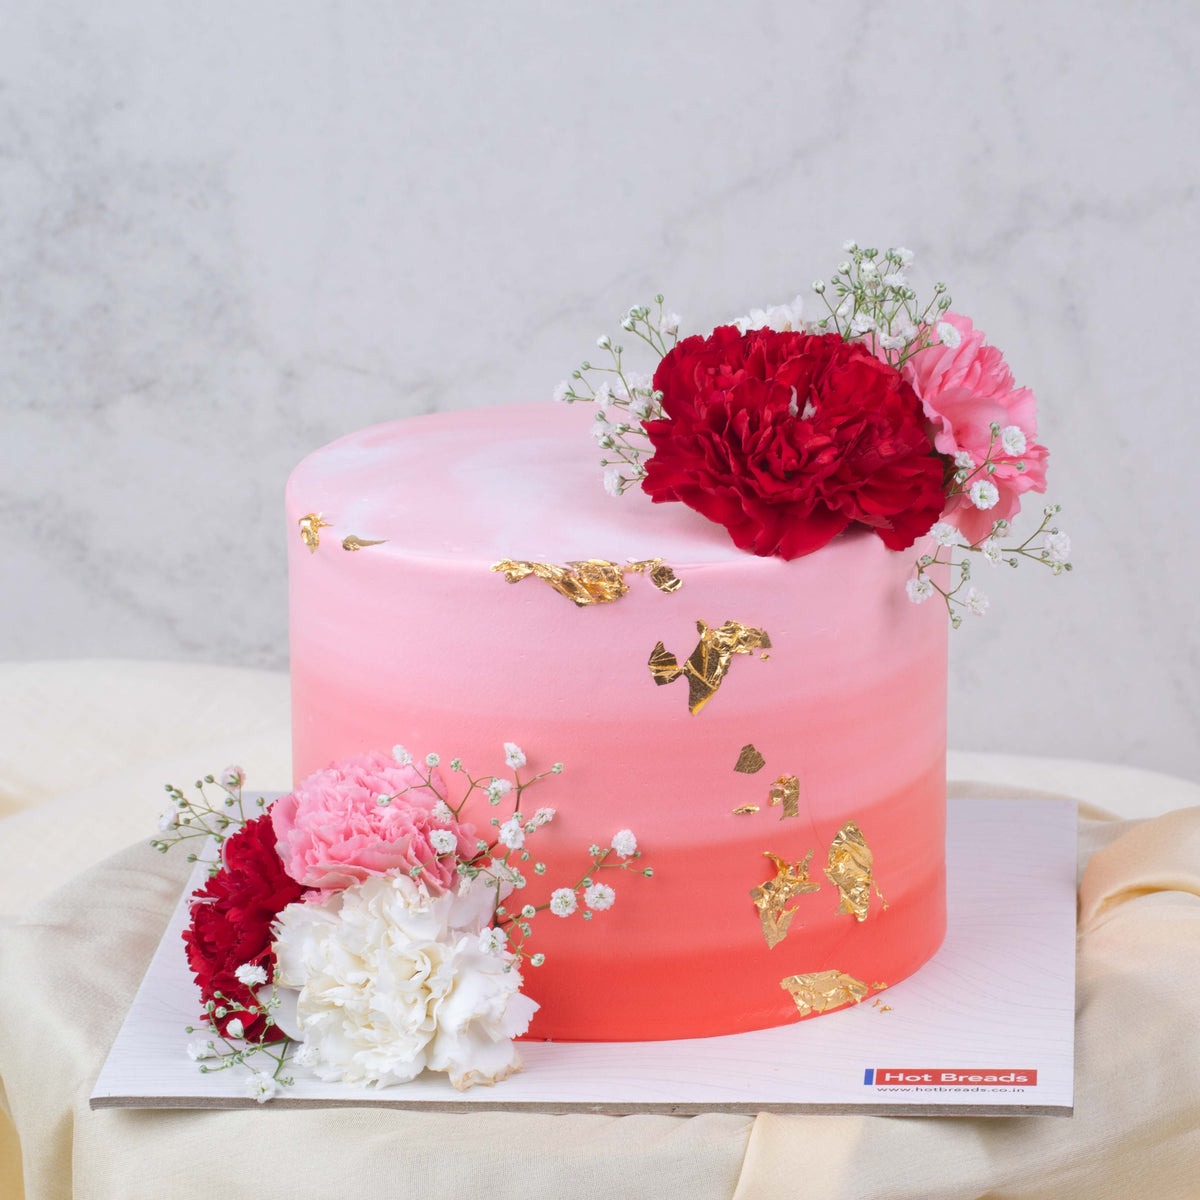 Floral Cake | Cake Shop in Chennai or Puducherry | Hot Breads